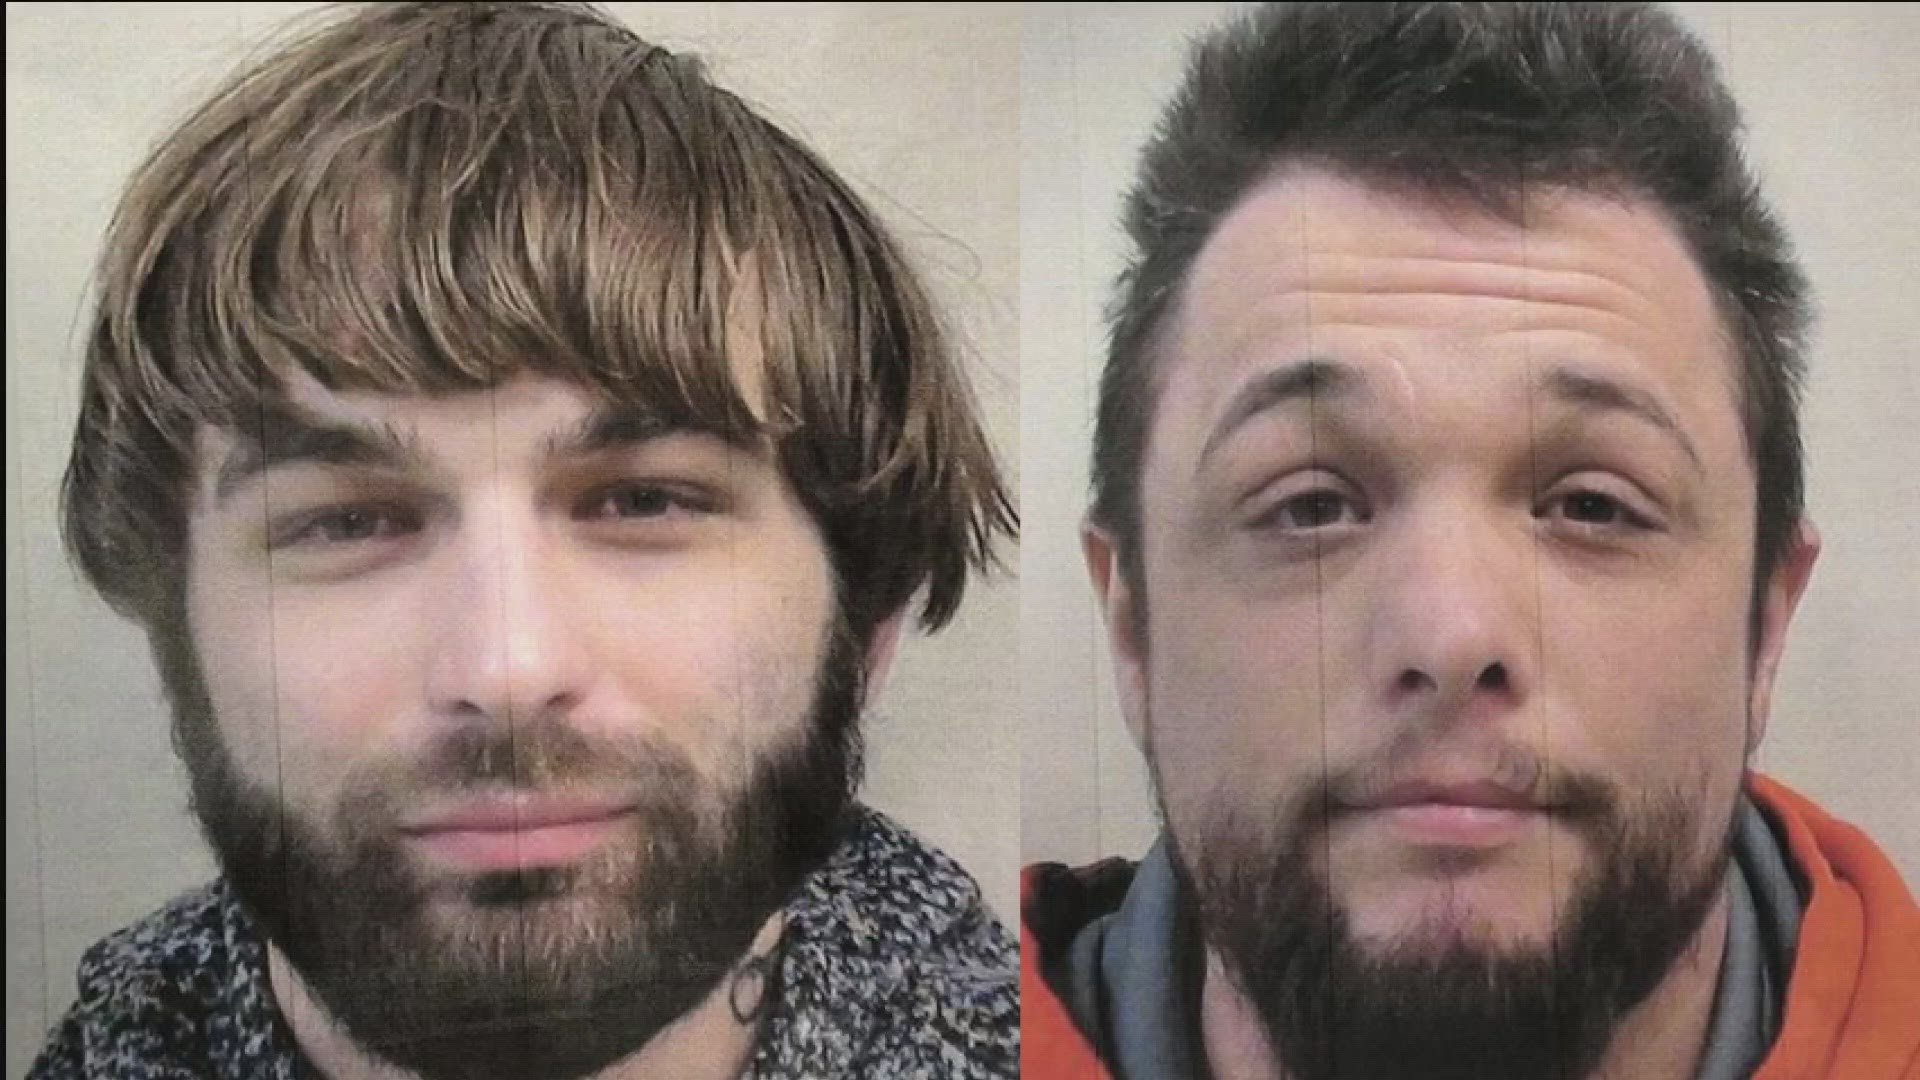 Officials say the pair of inmates were found inside a camper in Fostoria off of Turley Road, nearly 20 miles away from the center